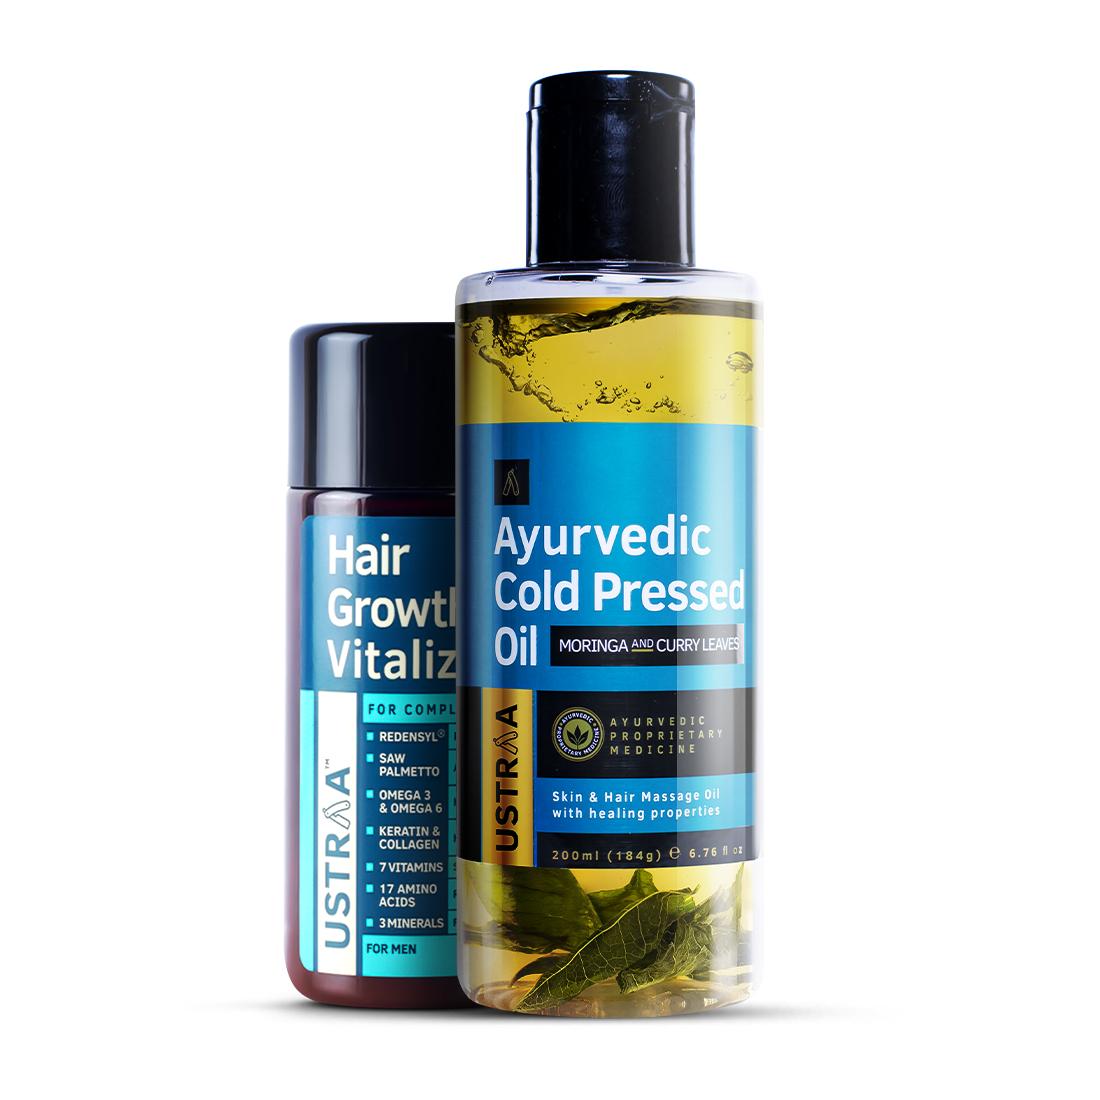 Ayurvedic Cold Pressed Oil & Hair Growth Vitalizer Combo